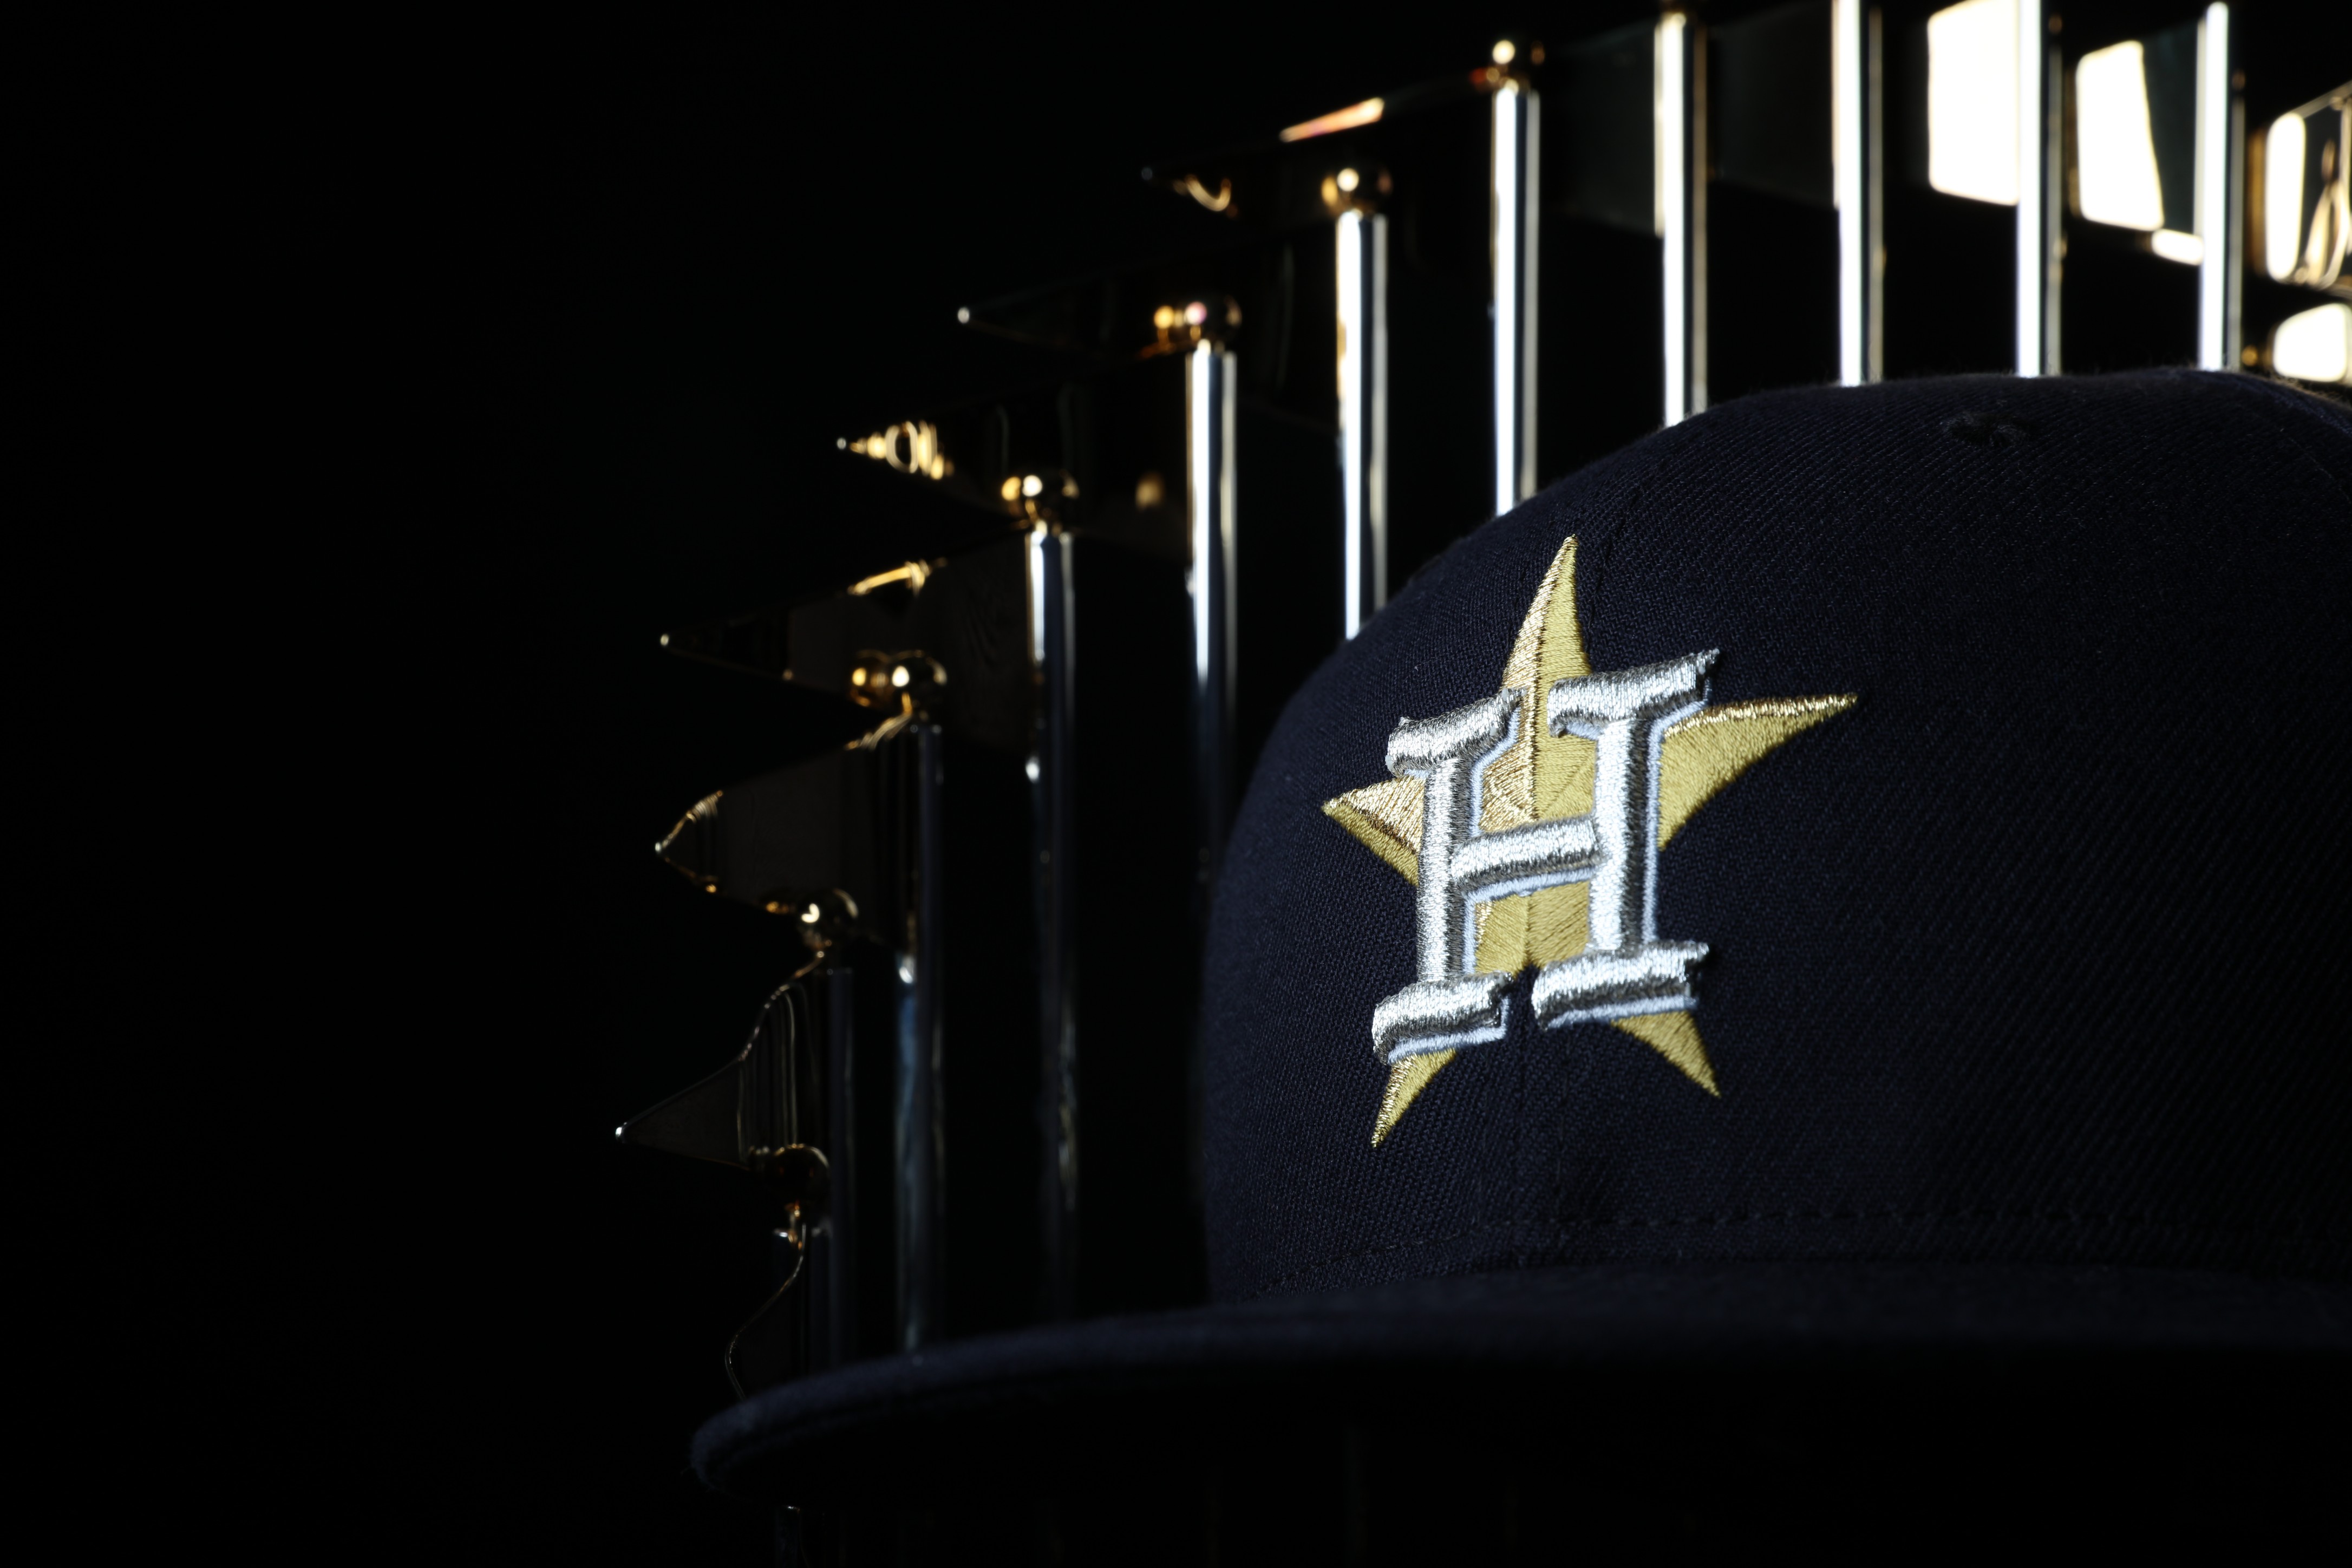 Fans line up for special Astros 'Gold Rush' gear